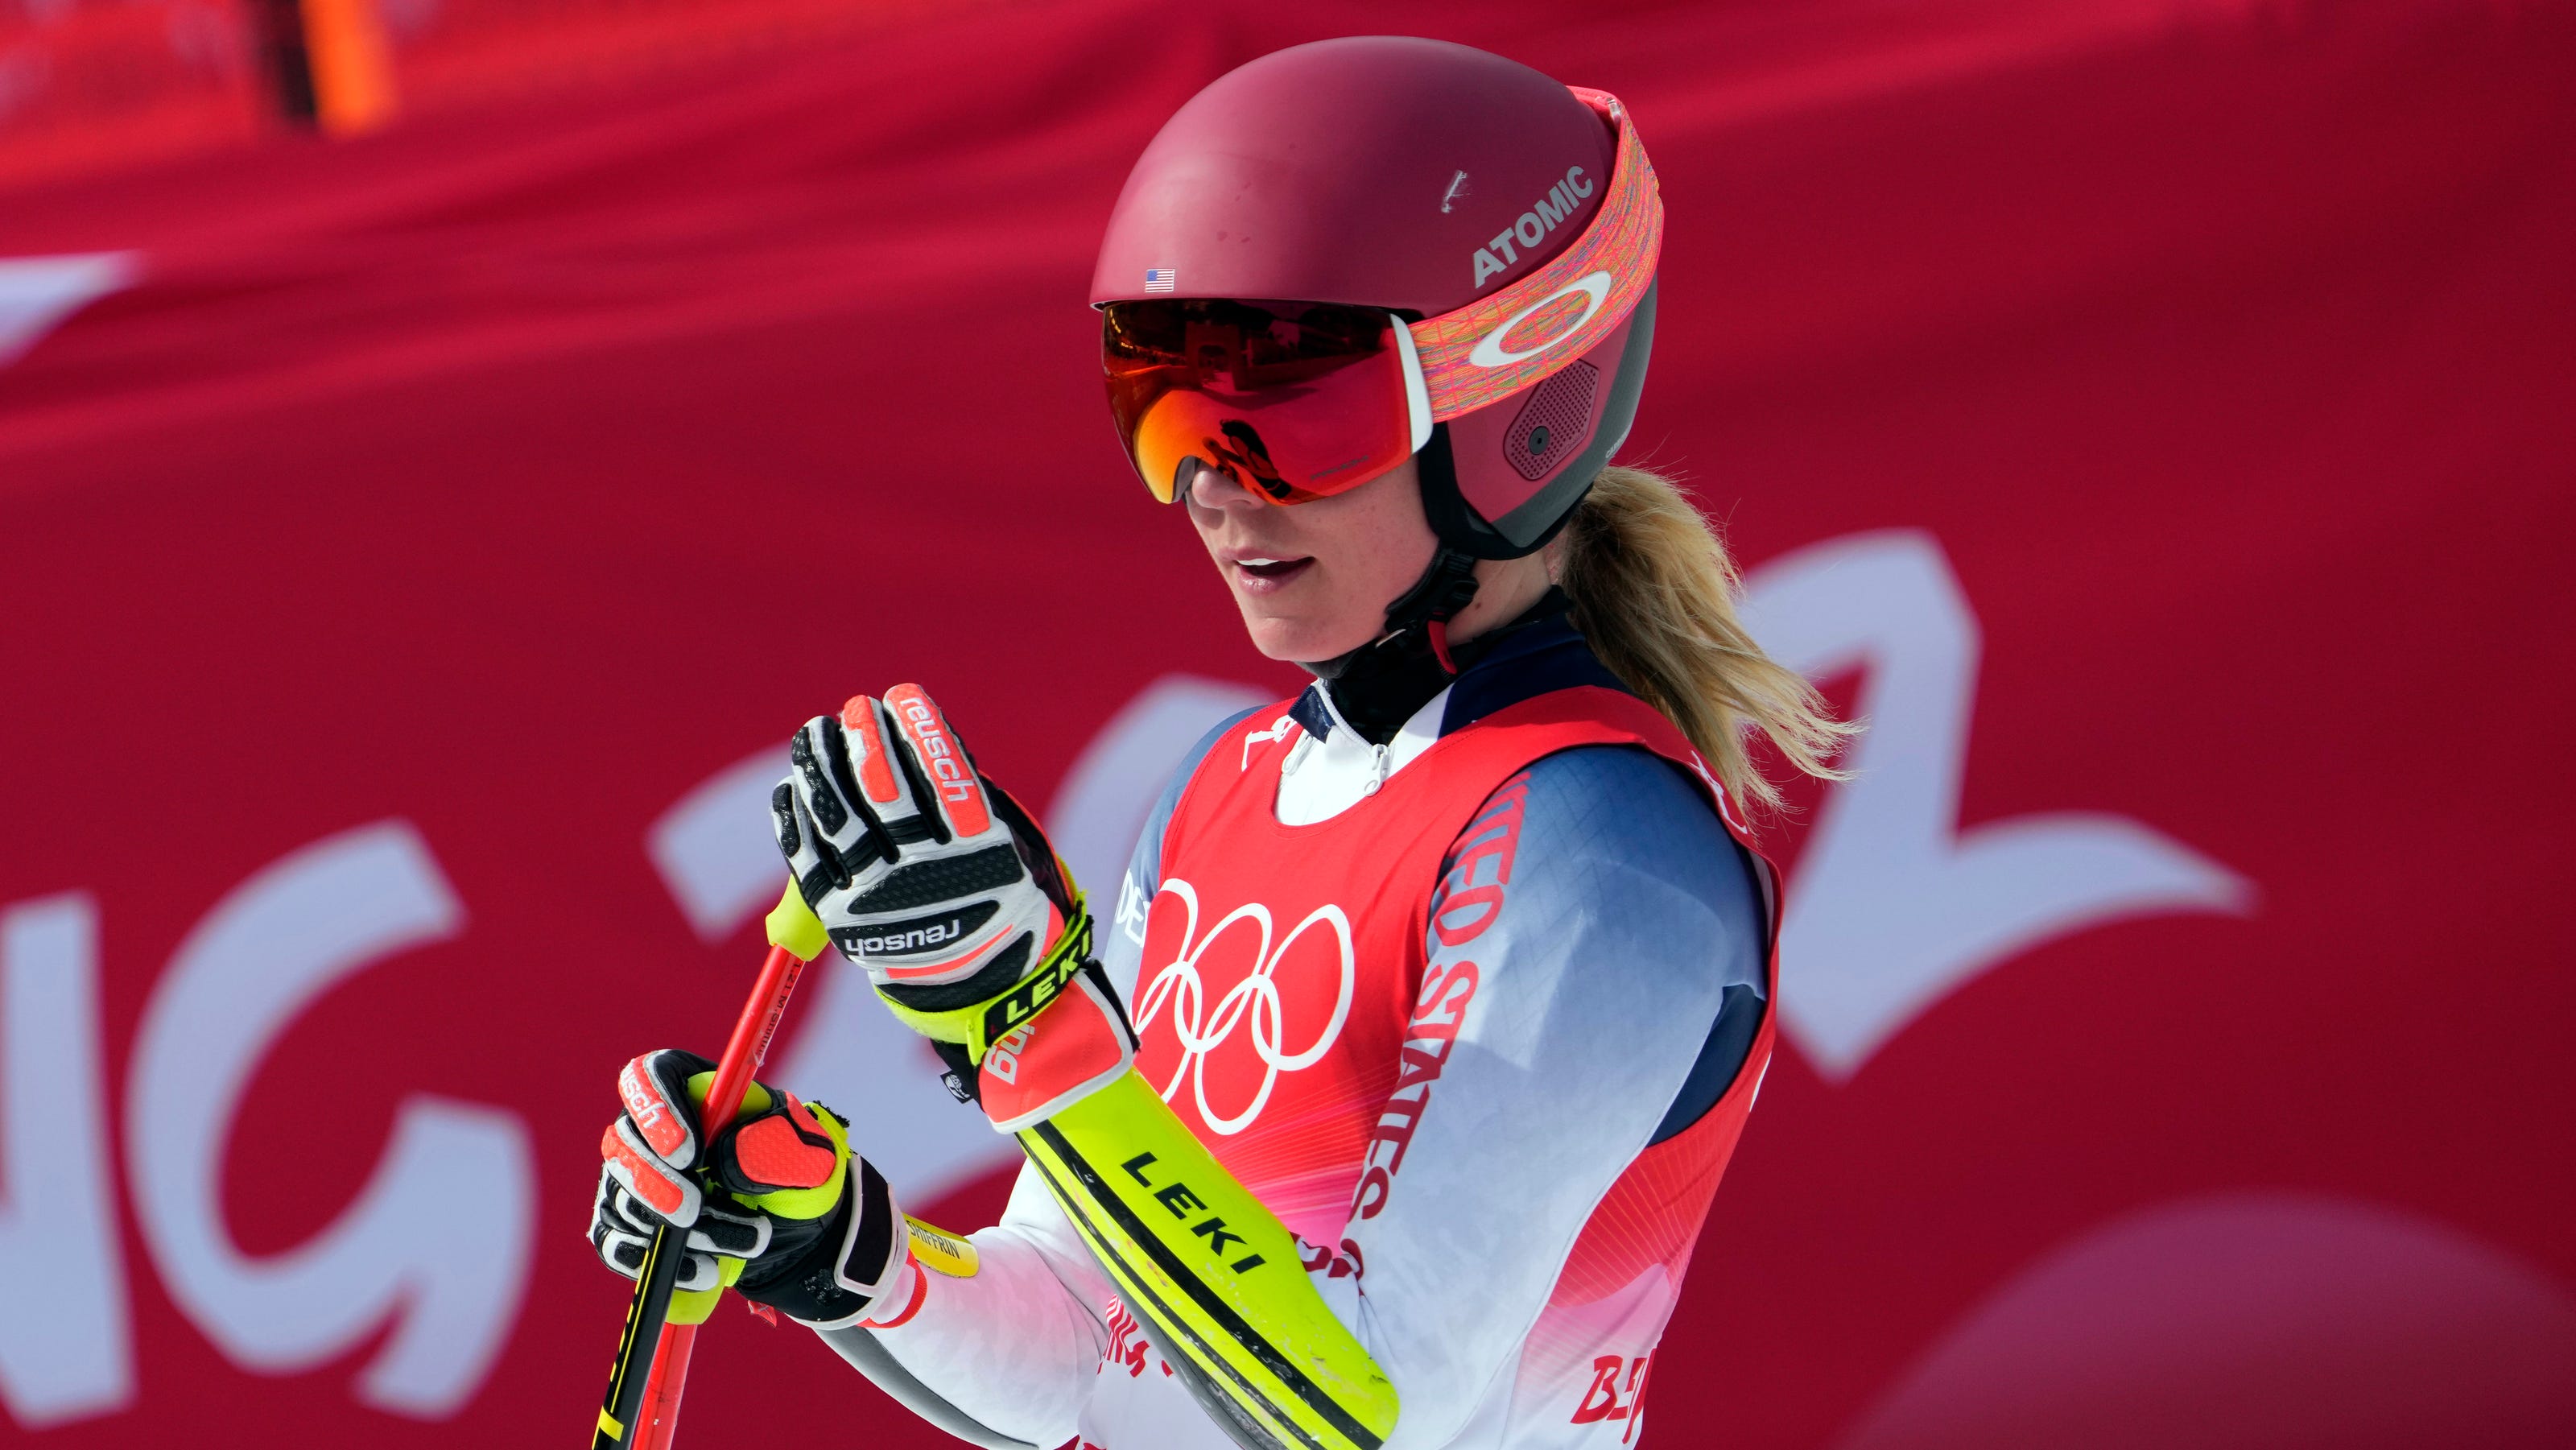 Mikaela Shiffrin's first downhill training run better than expected